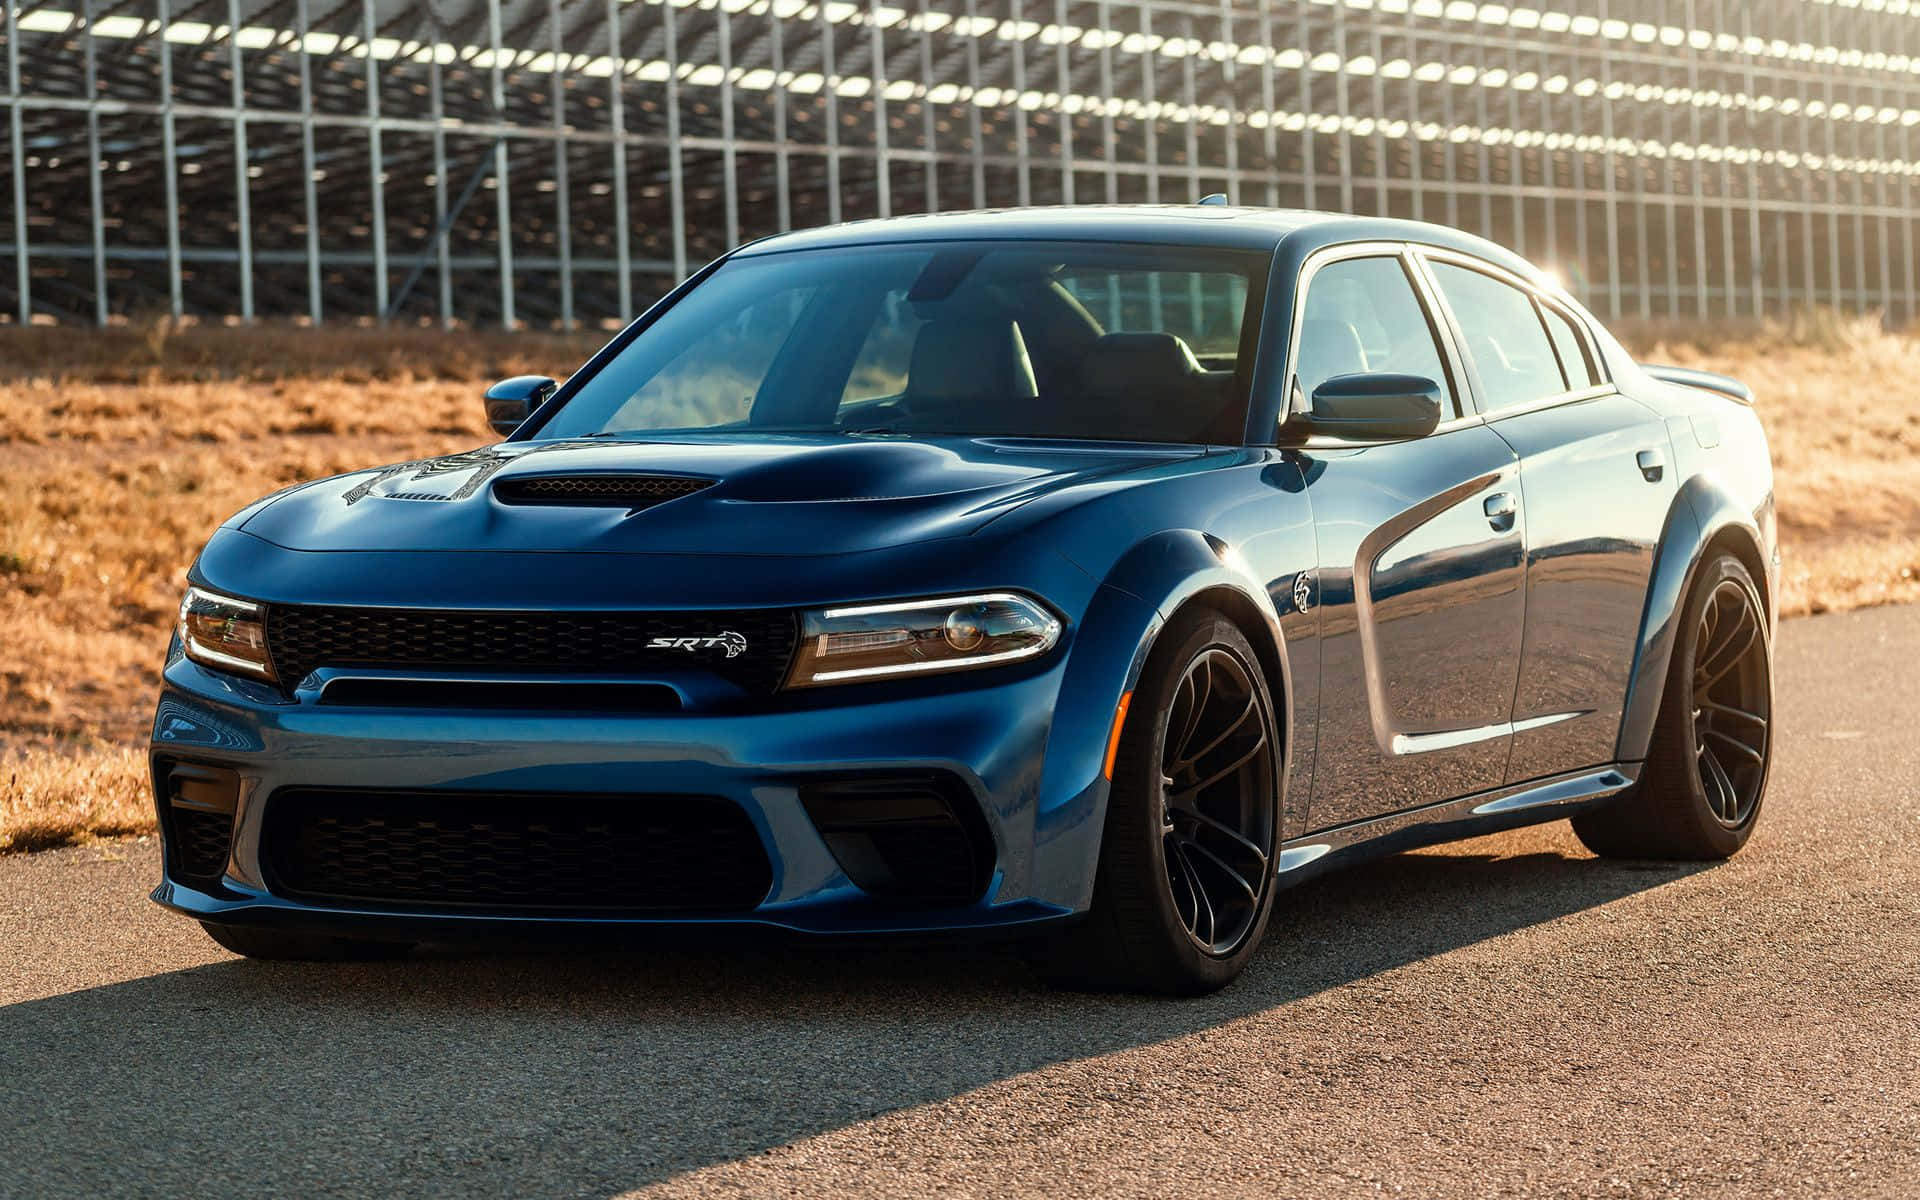 Sleek and Powerful Dodge Charger on the open road Wallpaper